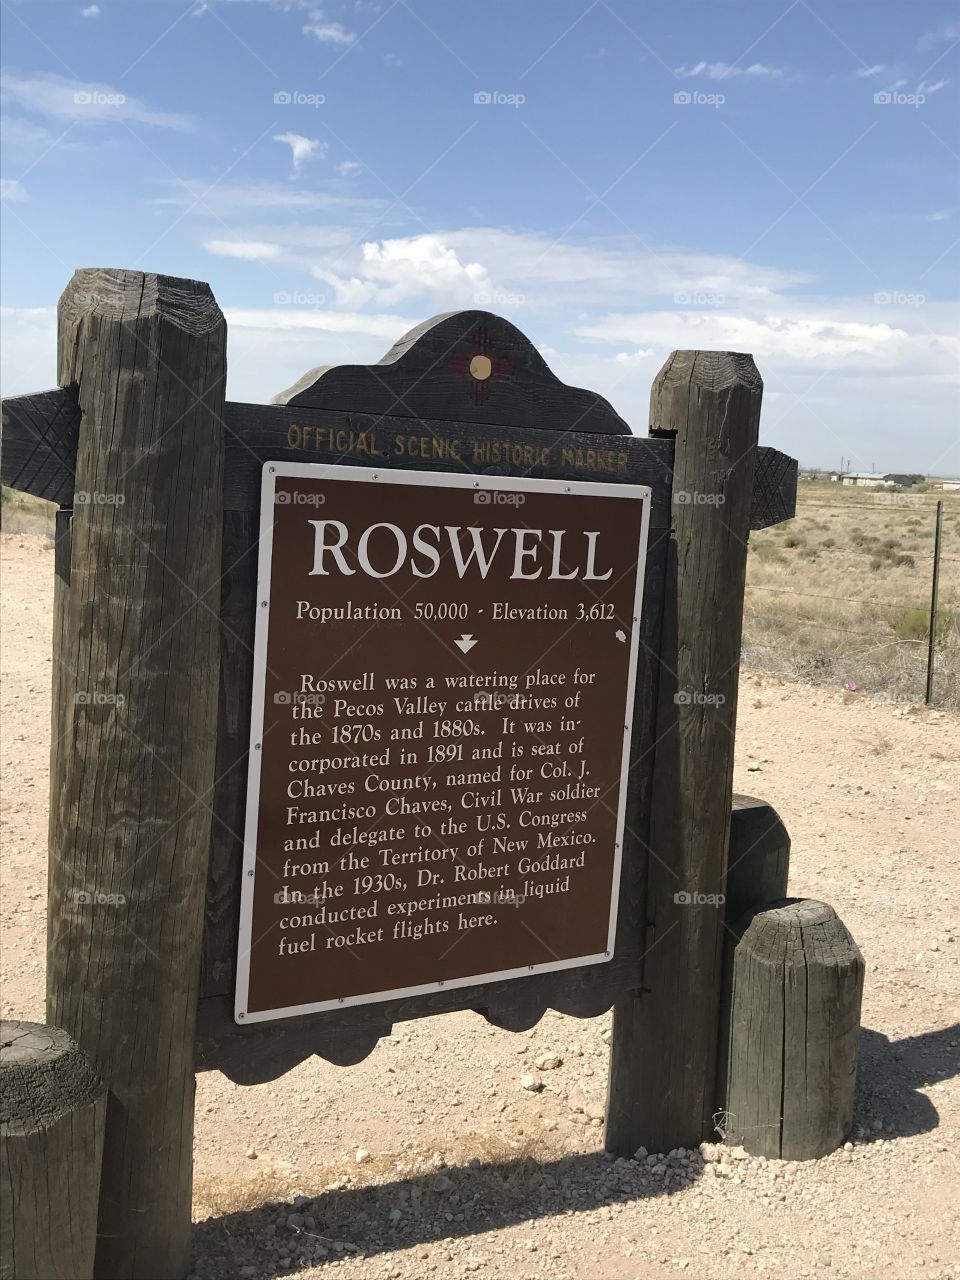 Roswell welcome information sign